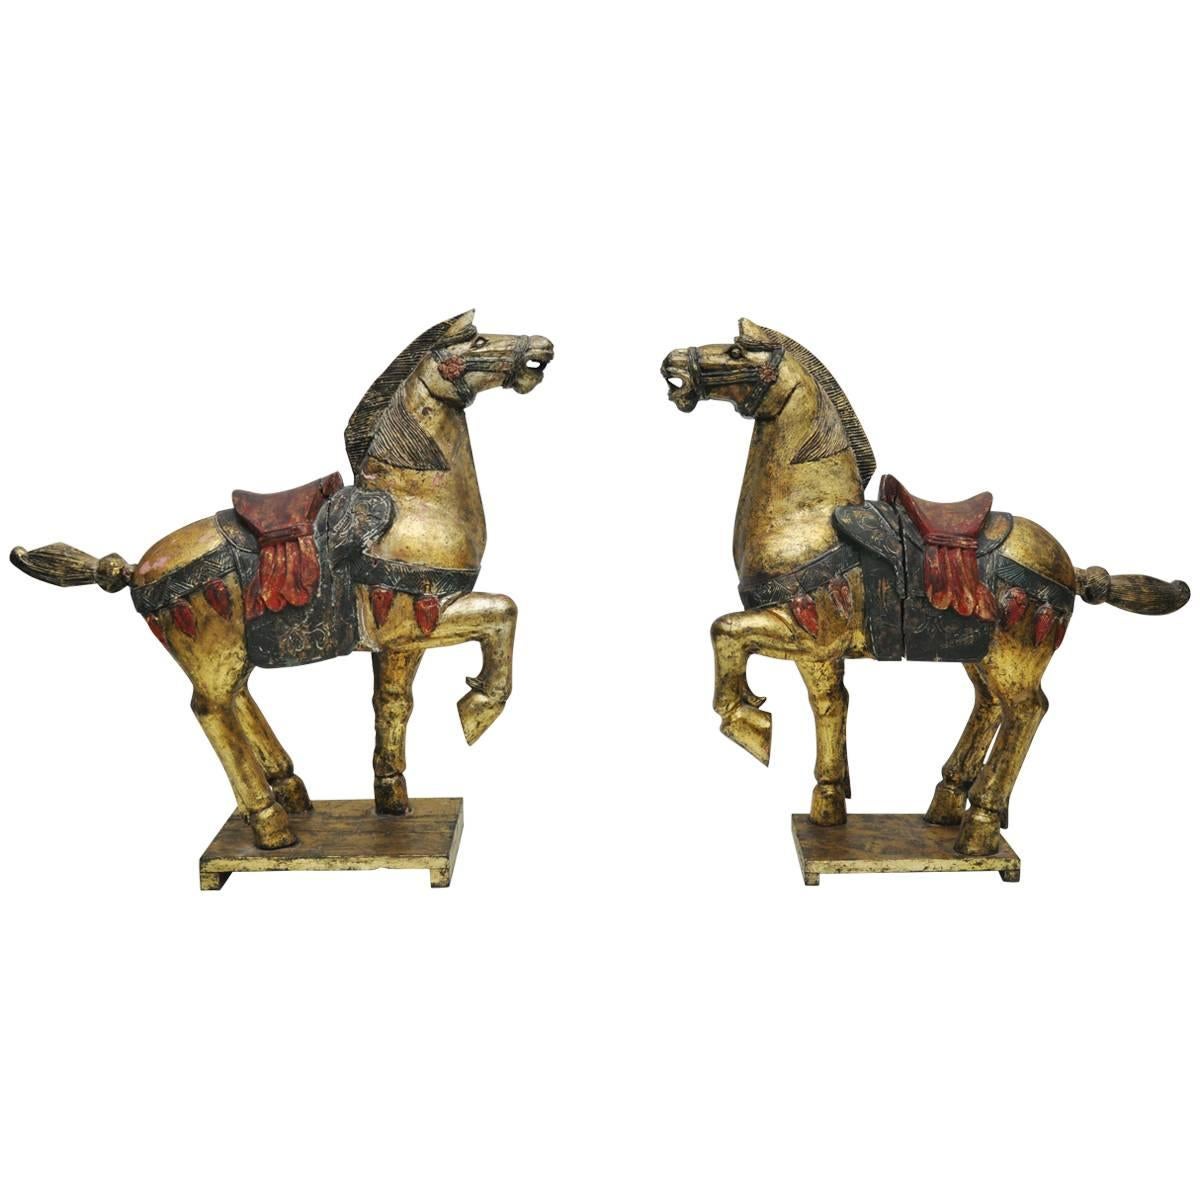 Large Pair of Carved Wooden Tang Horses